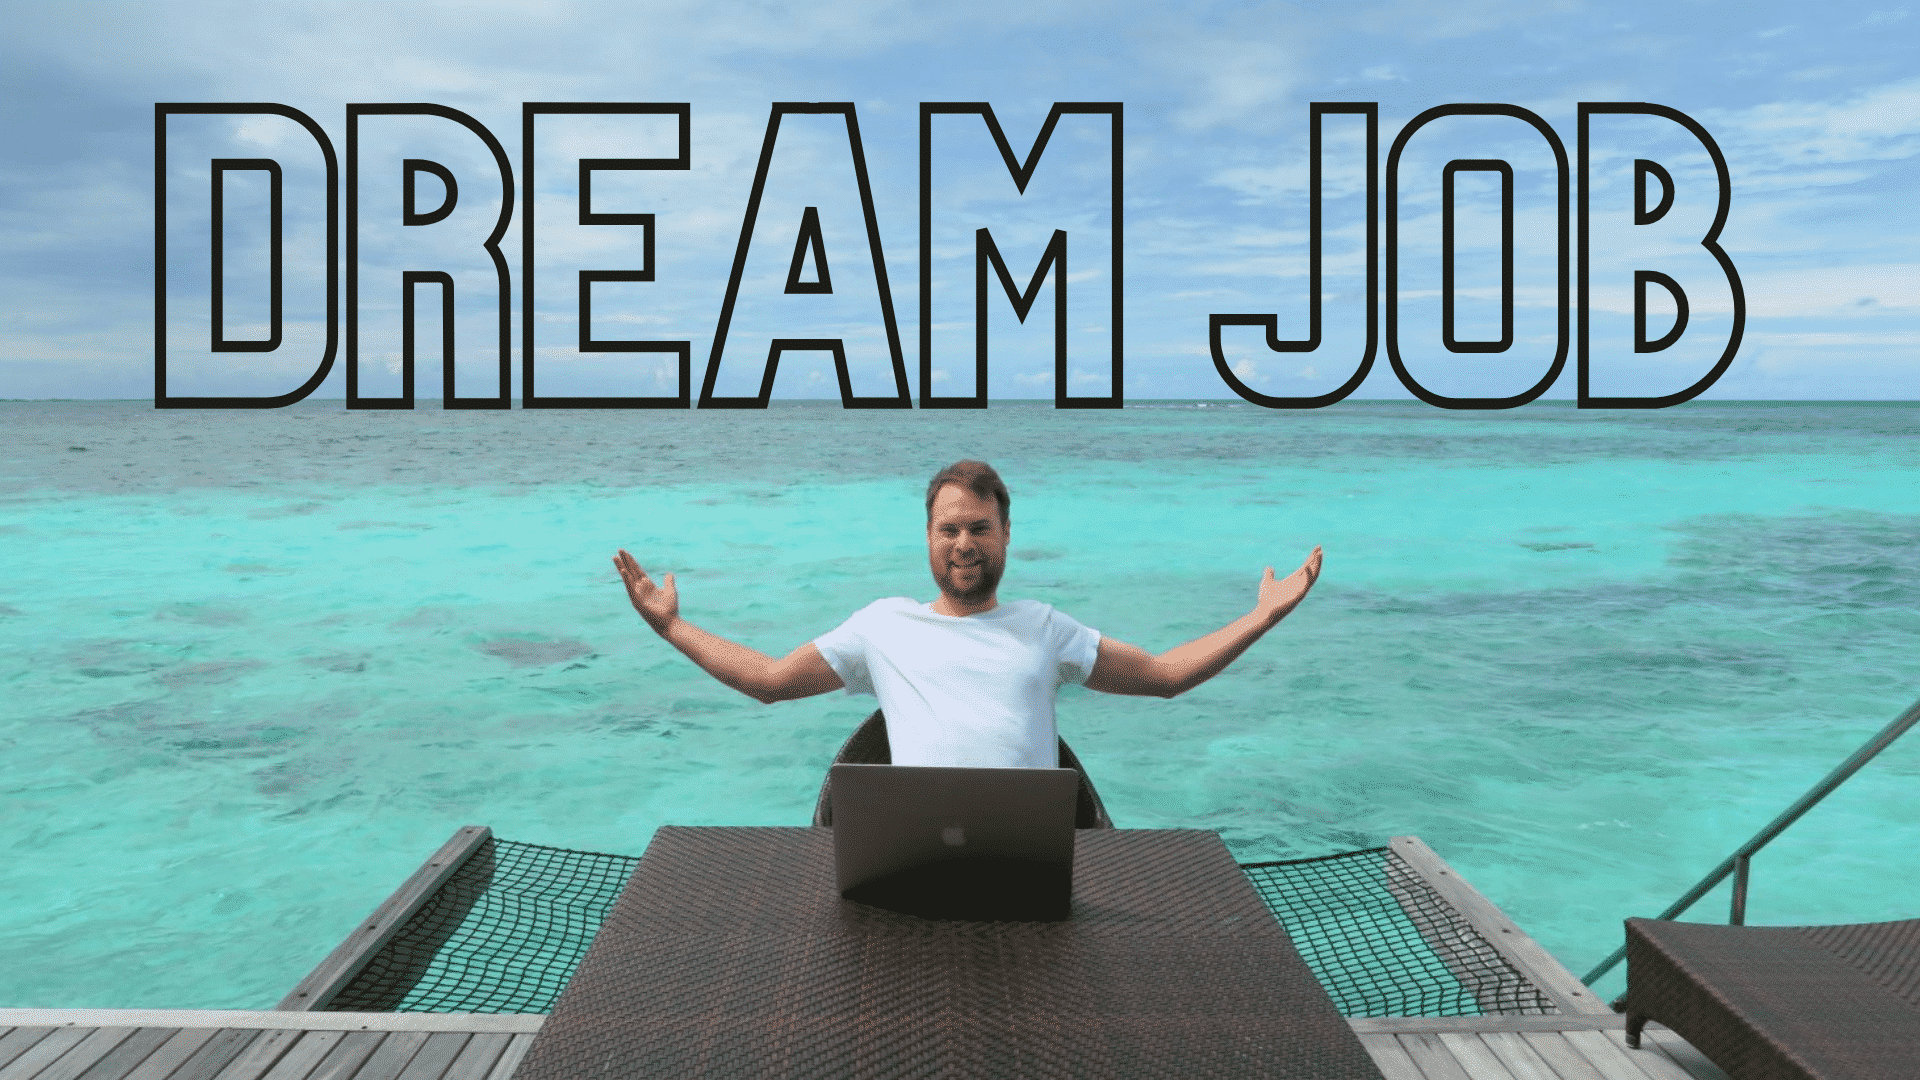 How to Create Your Dream Job